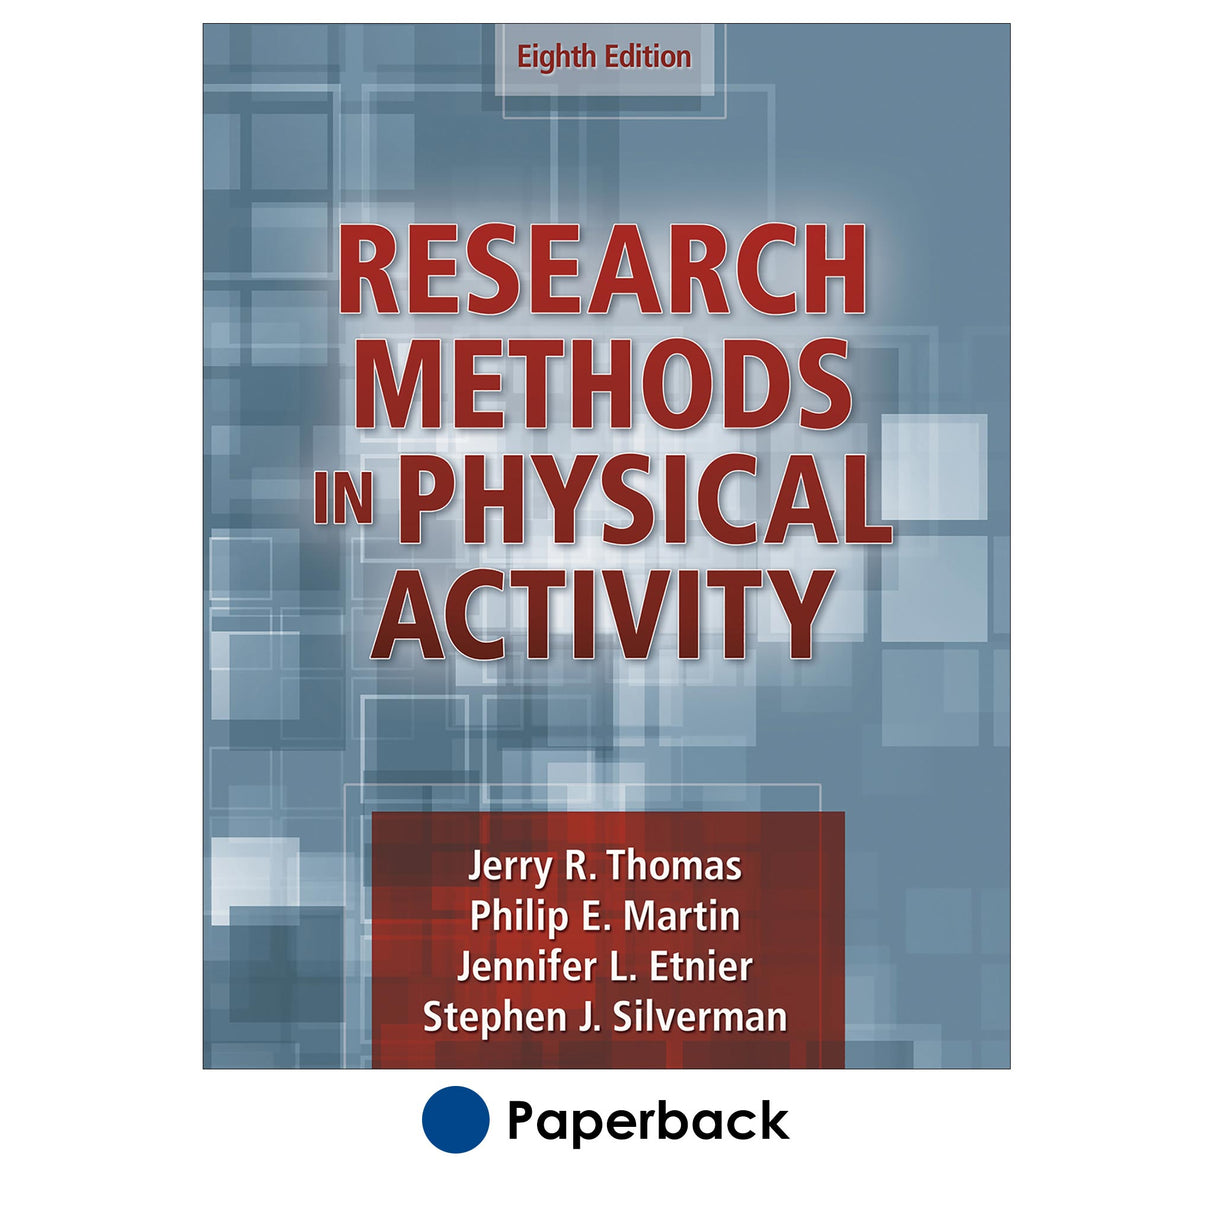 Research Methods in Physical Activity-8th Edition